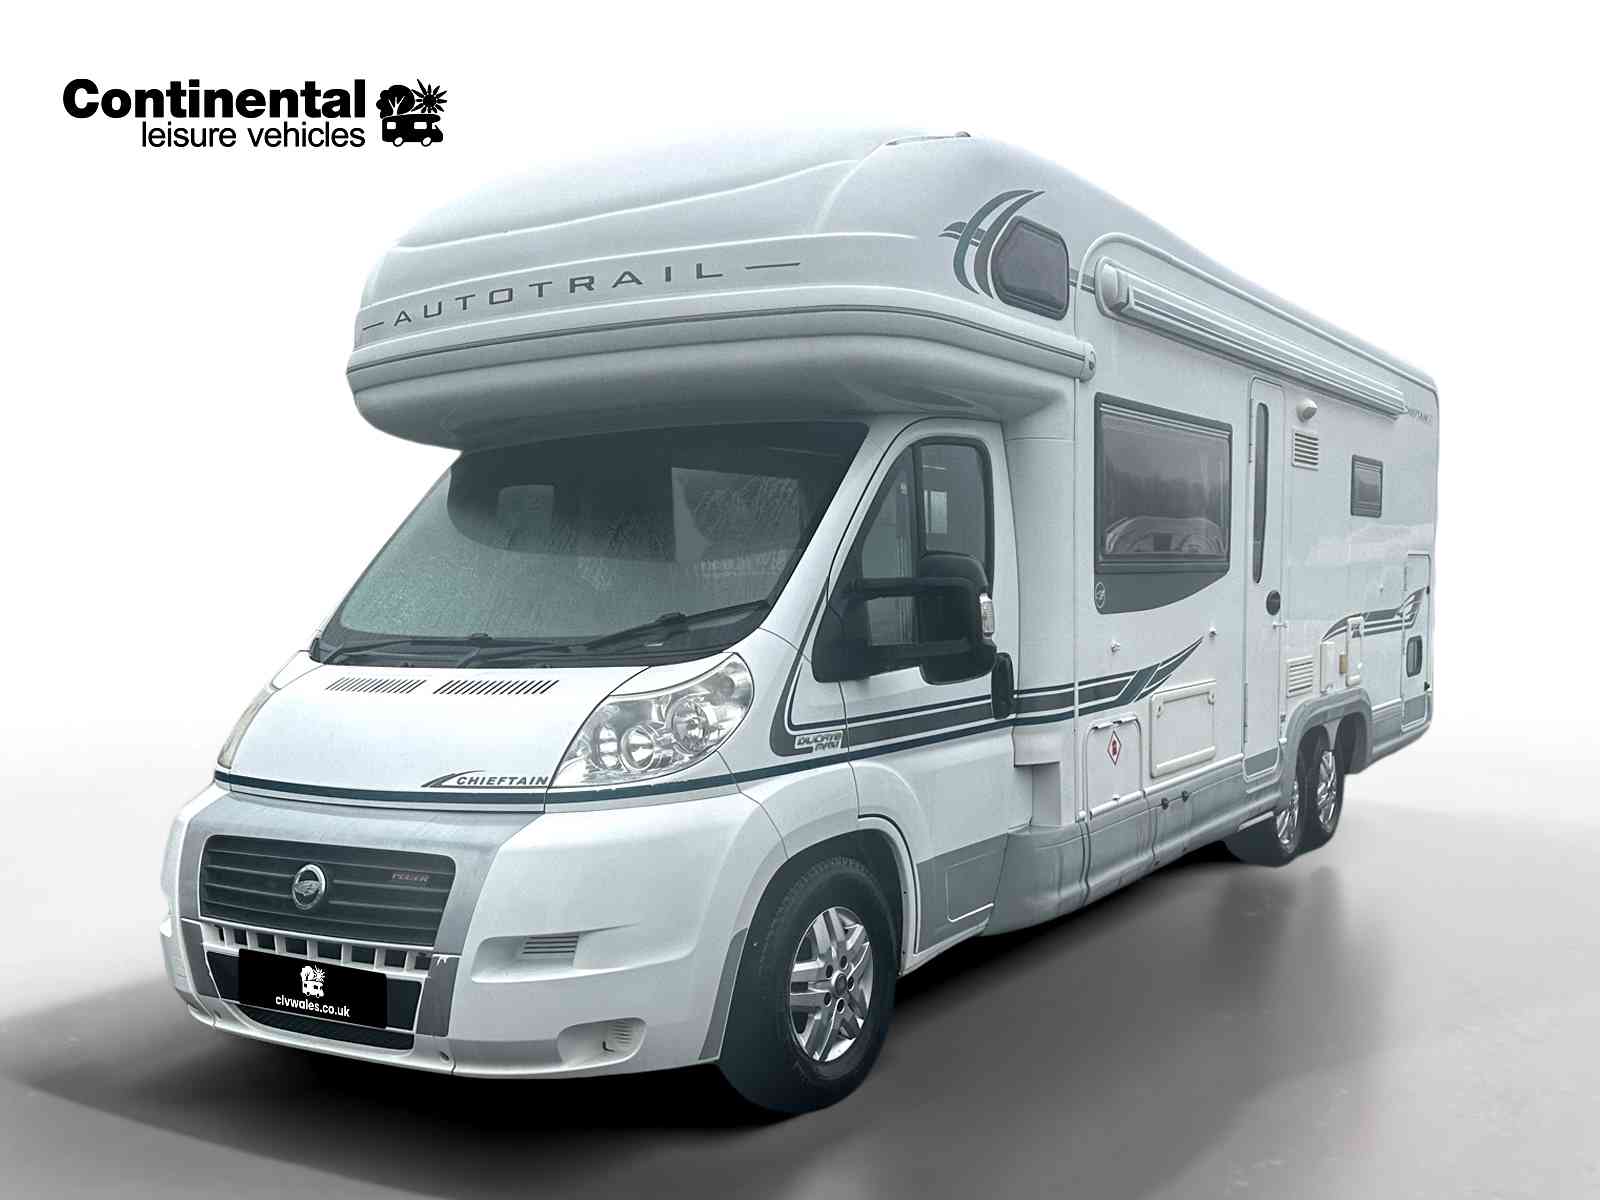 Picture of Auto-Trail Frontier Chieftain